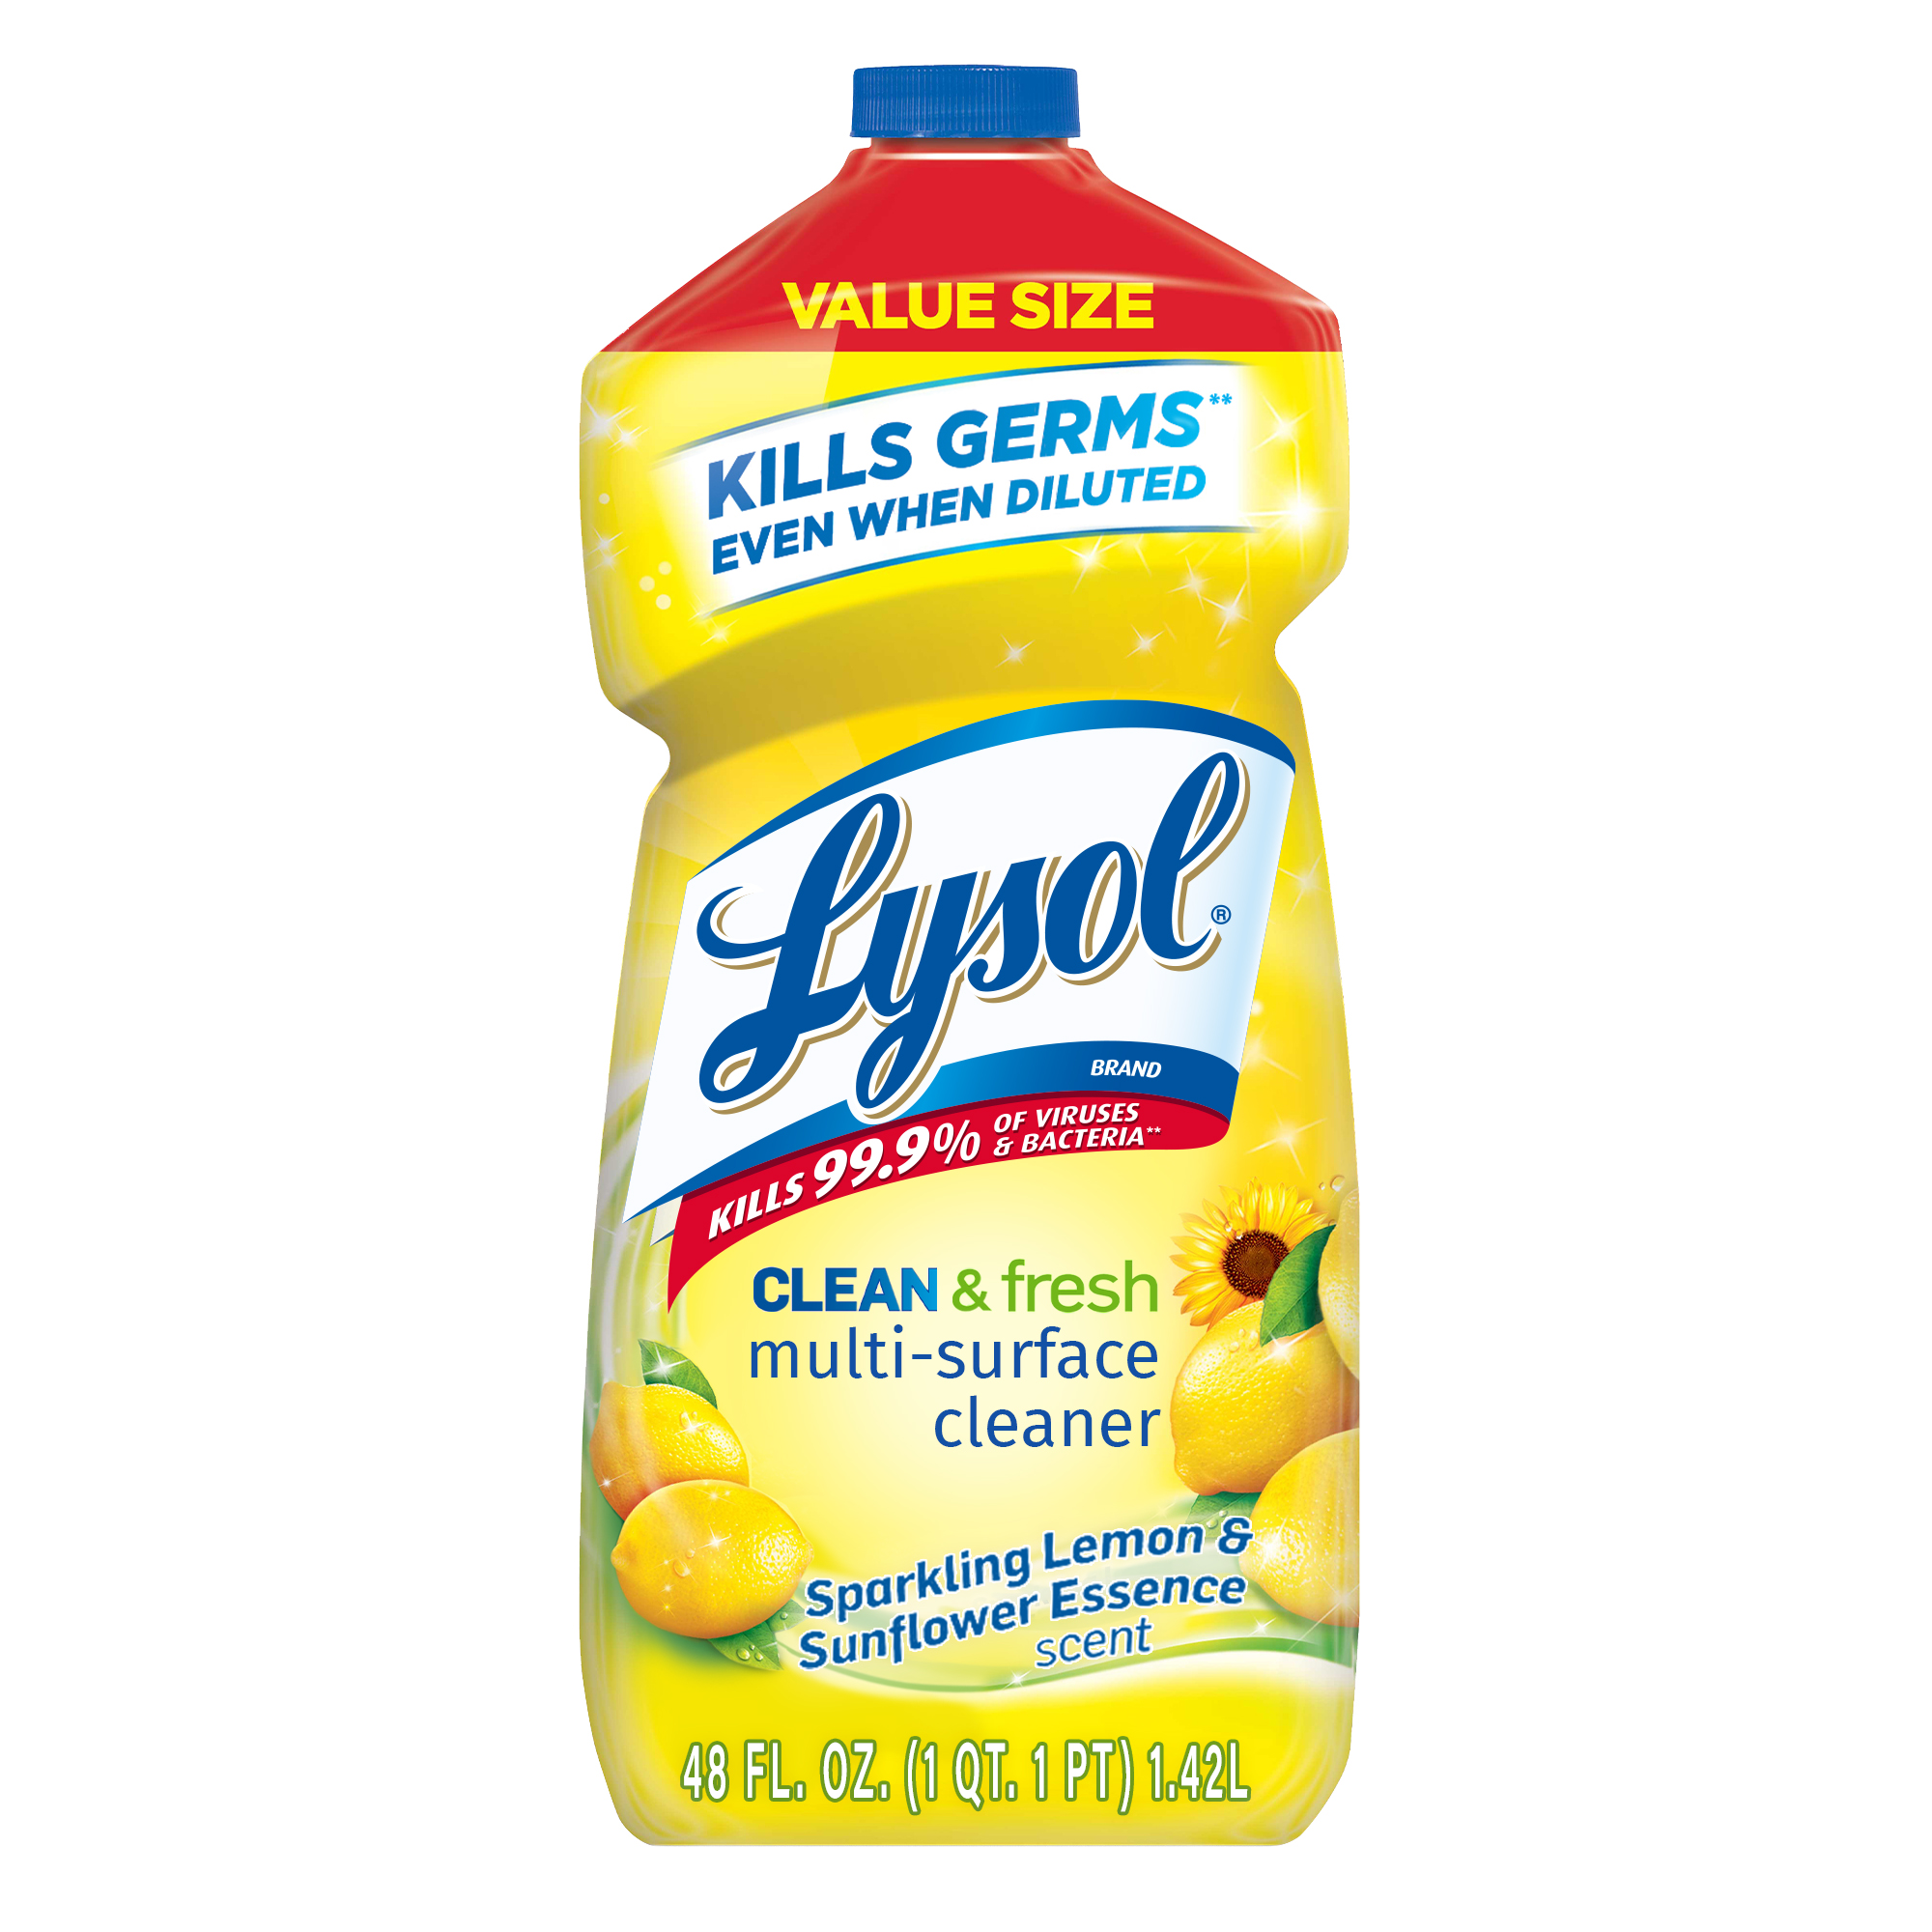 Lysol Multi-Surface Cleaner, Sanitizing and Disinfecting Pour, to Clean and Deodorize, Sparkling Lemon & Sunflower Essence, 48oz - image 1 of 6